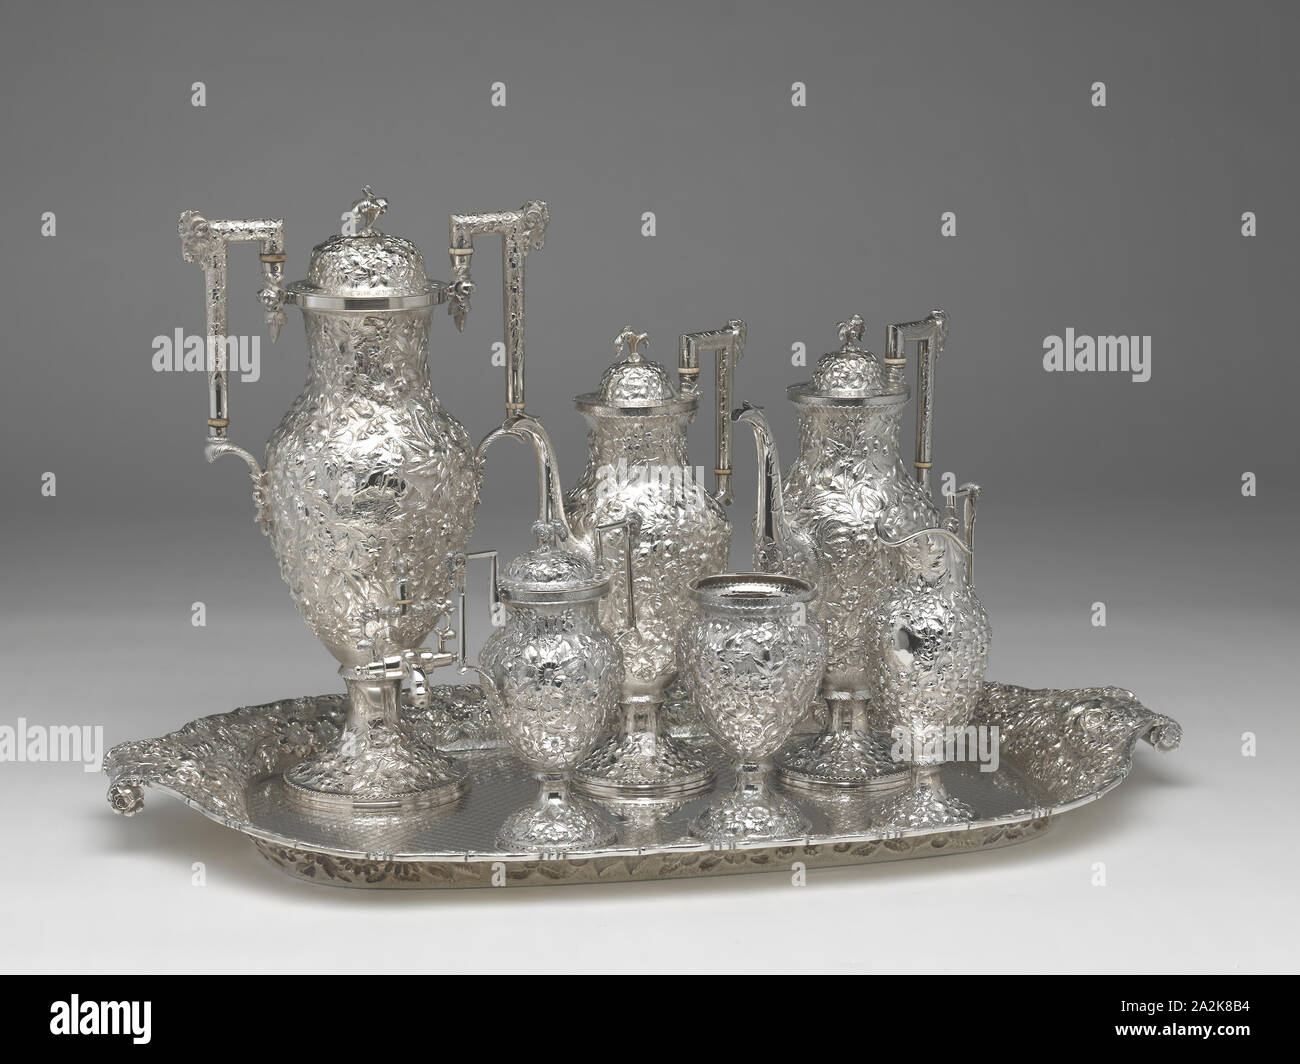 Tea and Coffee Service with Tray, 1850/1900, Andrew Ellicott Warner, American, 1786–1870, Andrew Ellicott Warner Jr., American, 1813–1896, Schofield Co. Inc., American, active 1903–65, Baltimore, Baltimore, Silver, Tray: 77.5 × 46.7 cm (31 ½ × 18 3/8 in.), urn, h.: 44.1 cm (17 3/8 in.), 1988.5 g, pot, h.: 34 cm (13 3/8 in.), 1093.6 g, pot, h.: 33.3 cm (13 1/8 in.), 1066.5 g, sugar bowl, h.: 22.5 cm (8 7/8 in.), 647.5 g, creamer, h.: 23.3 cm (9 3/16 in.), 363.4 g, slop basin, h.: 17.8 cm (7 in.), 408.9 g Stock Photo